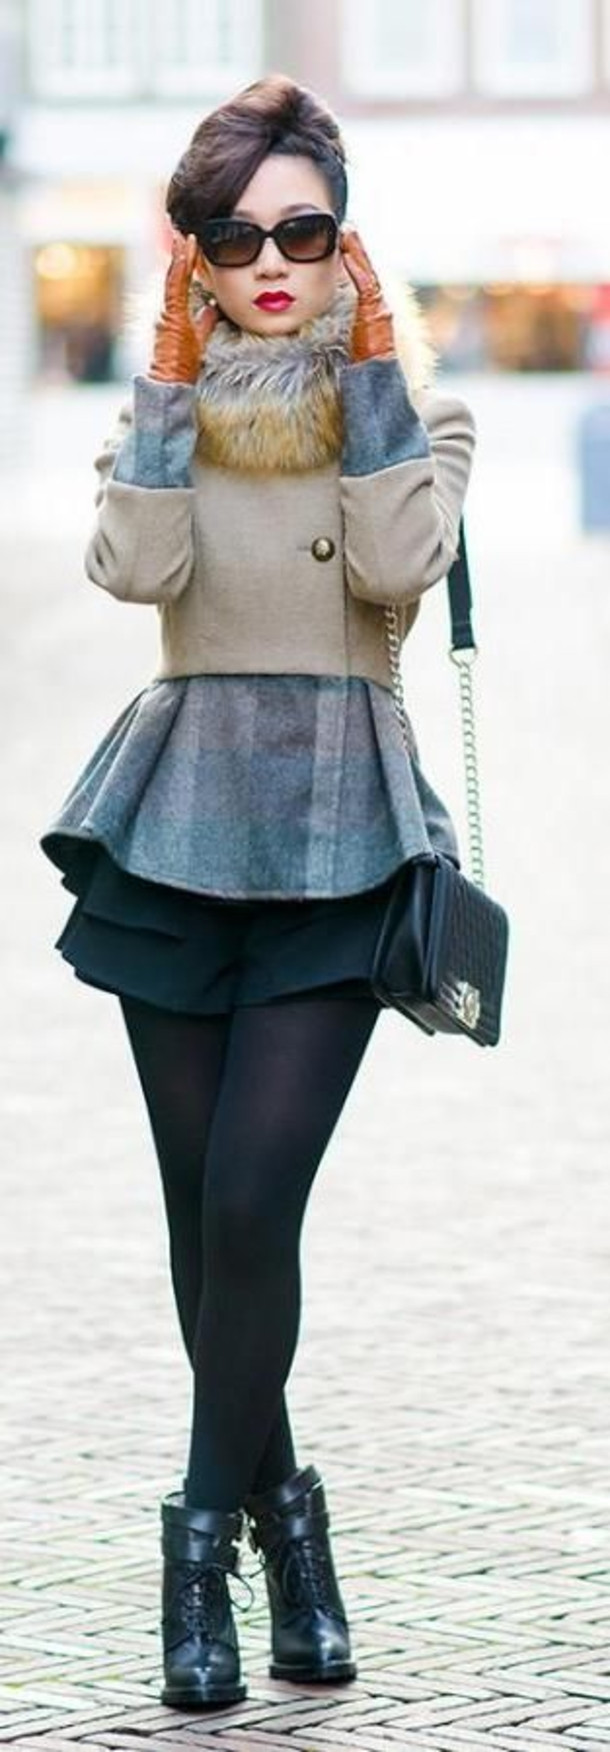 Women Fall Outfit Ideas
 10 Fall Outfit Ideas For Women